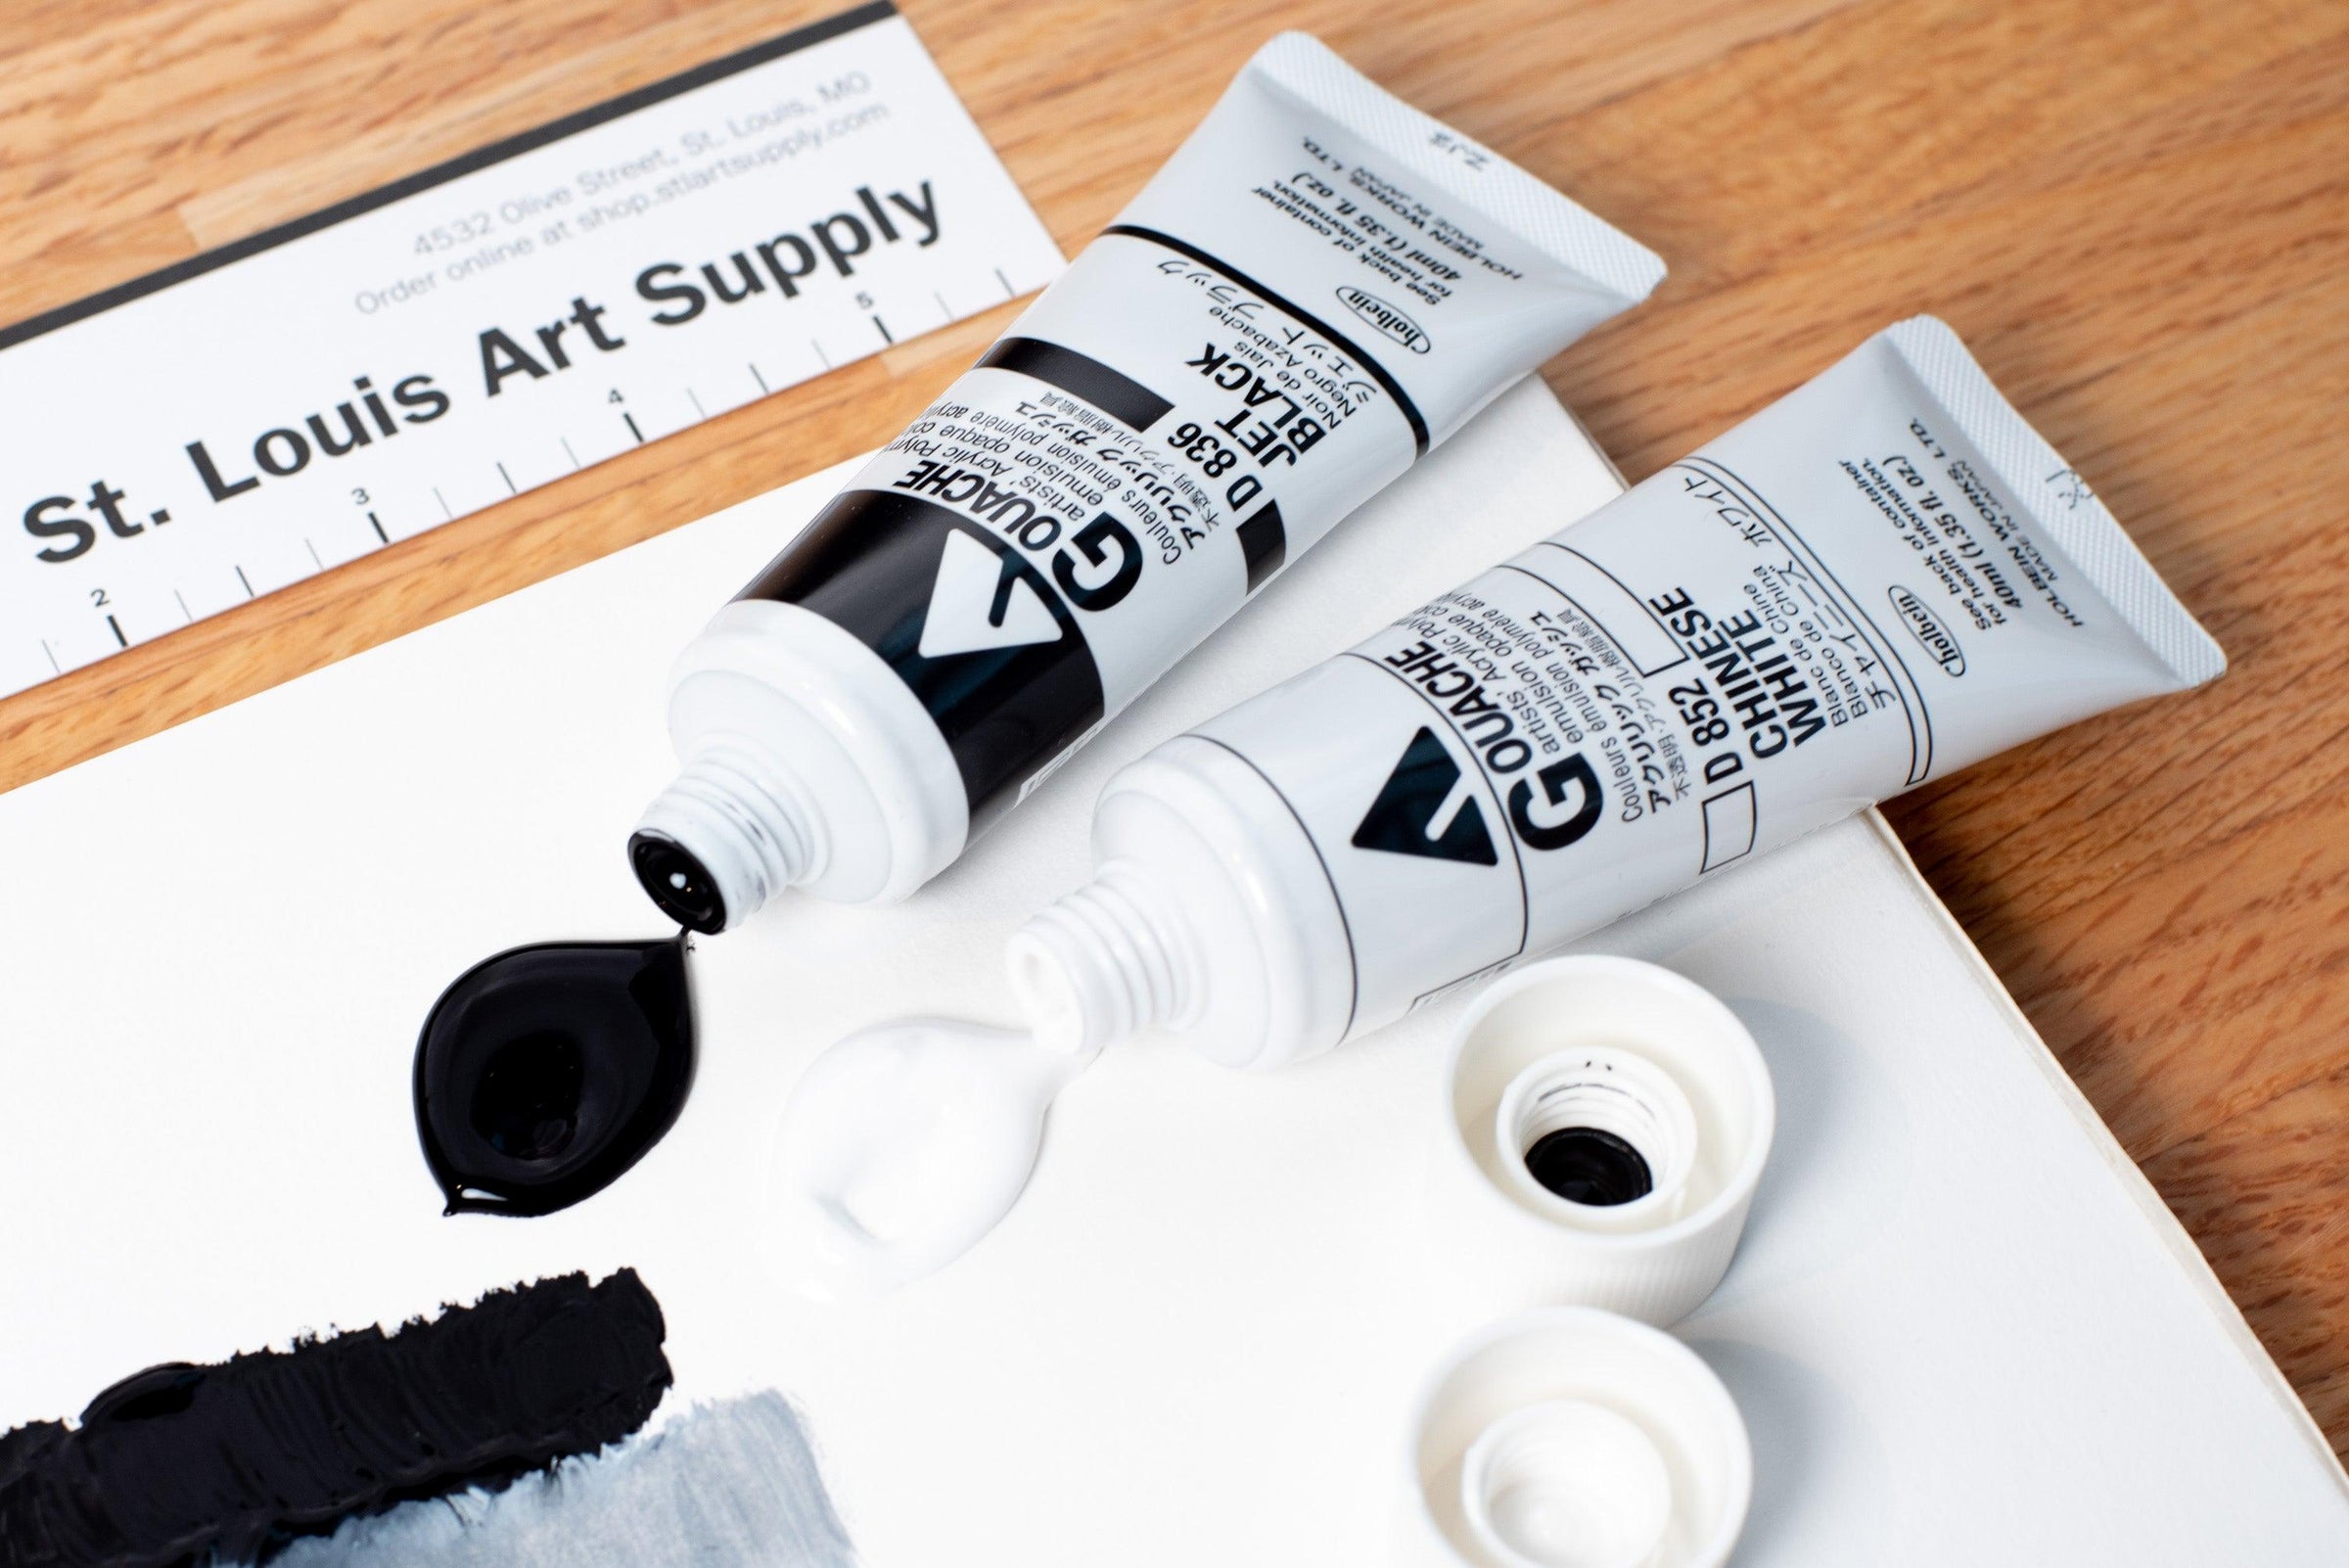 Holbein Acrylic Ink Super Opaque White